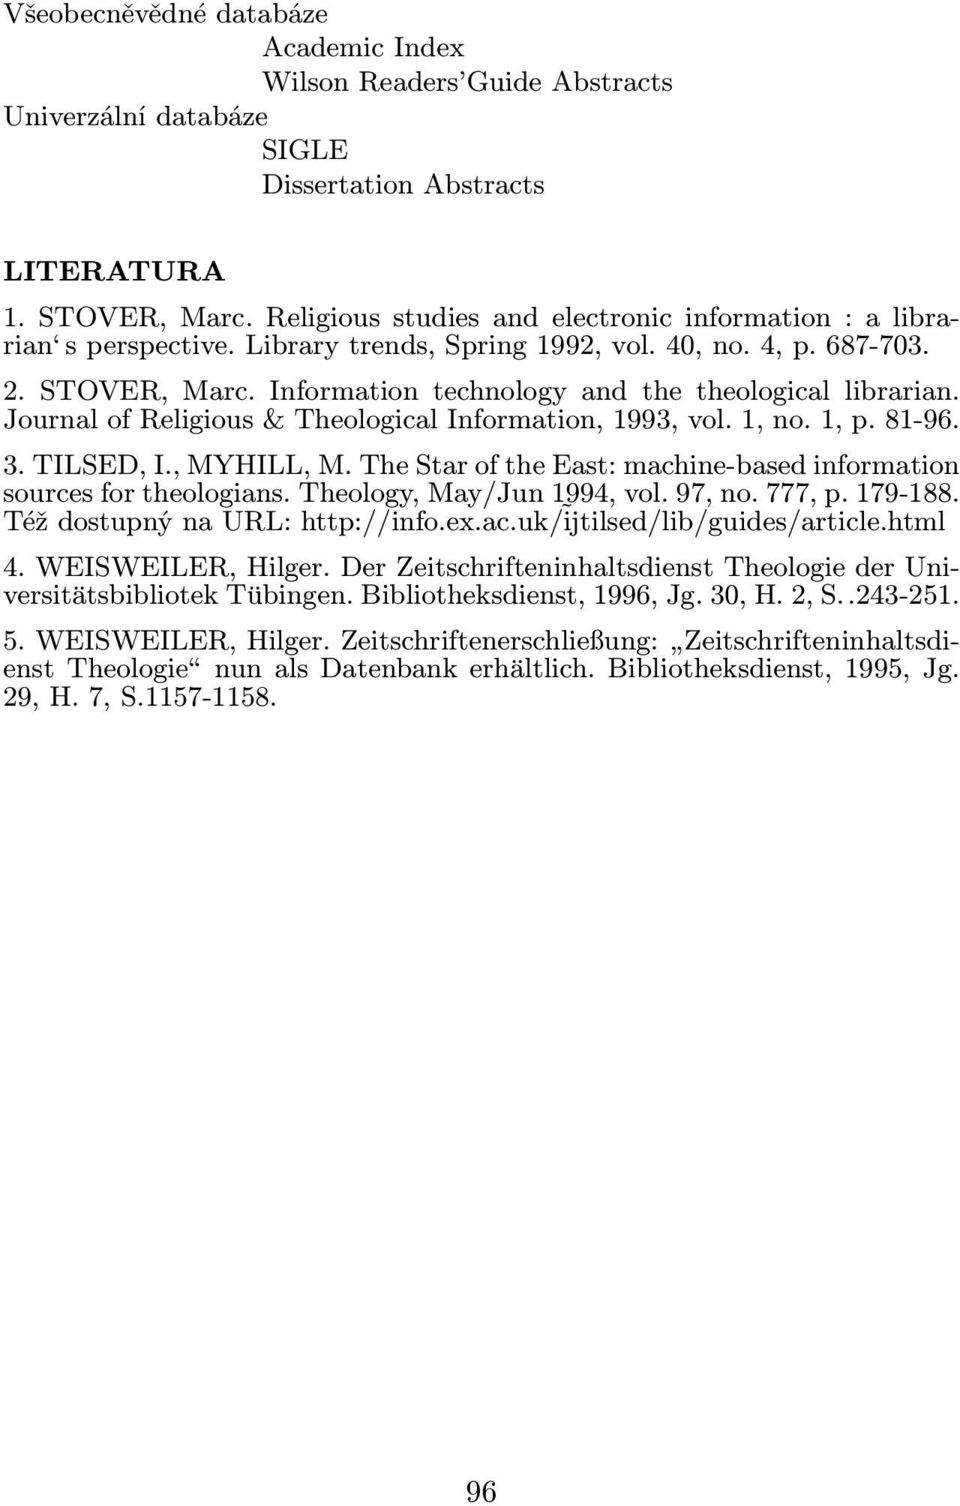 Journal of Religious& Theological Information, 1993, vol. 1, no. 1, p. 81-96. 3. TILSED, I., MYHILL, M. The Star of the East: machine-based information sources for theologians.